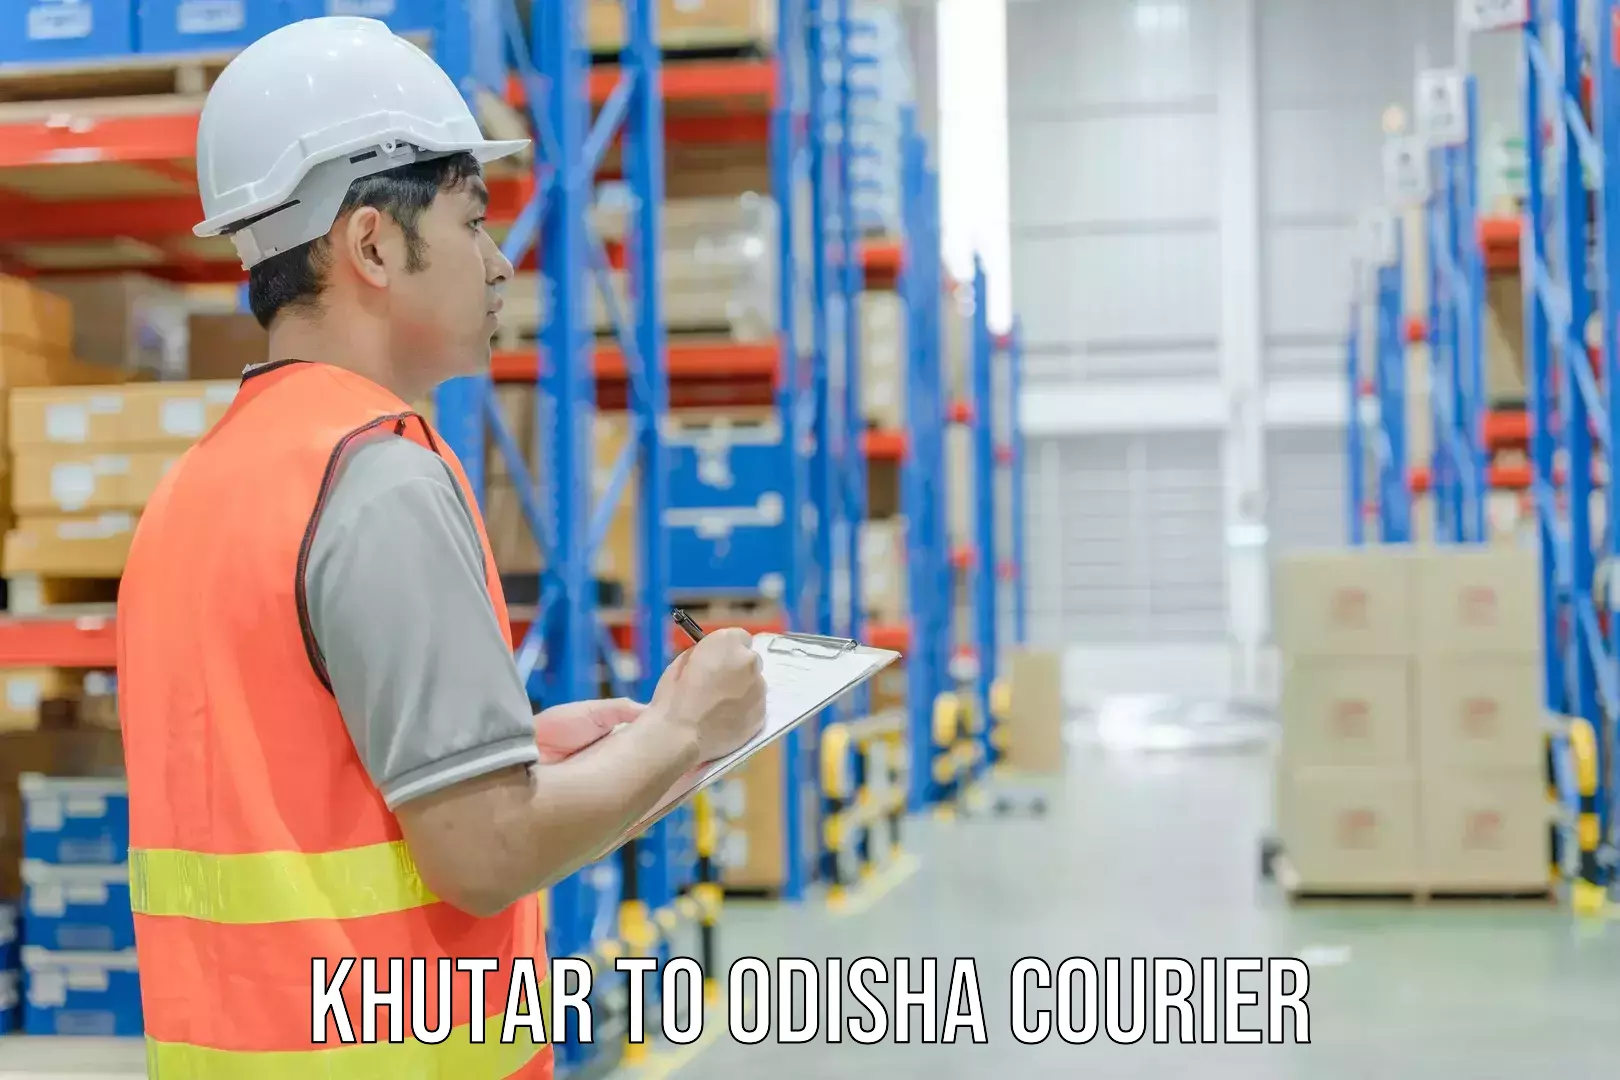 Local delivery service Khutar to Odisha